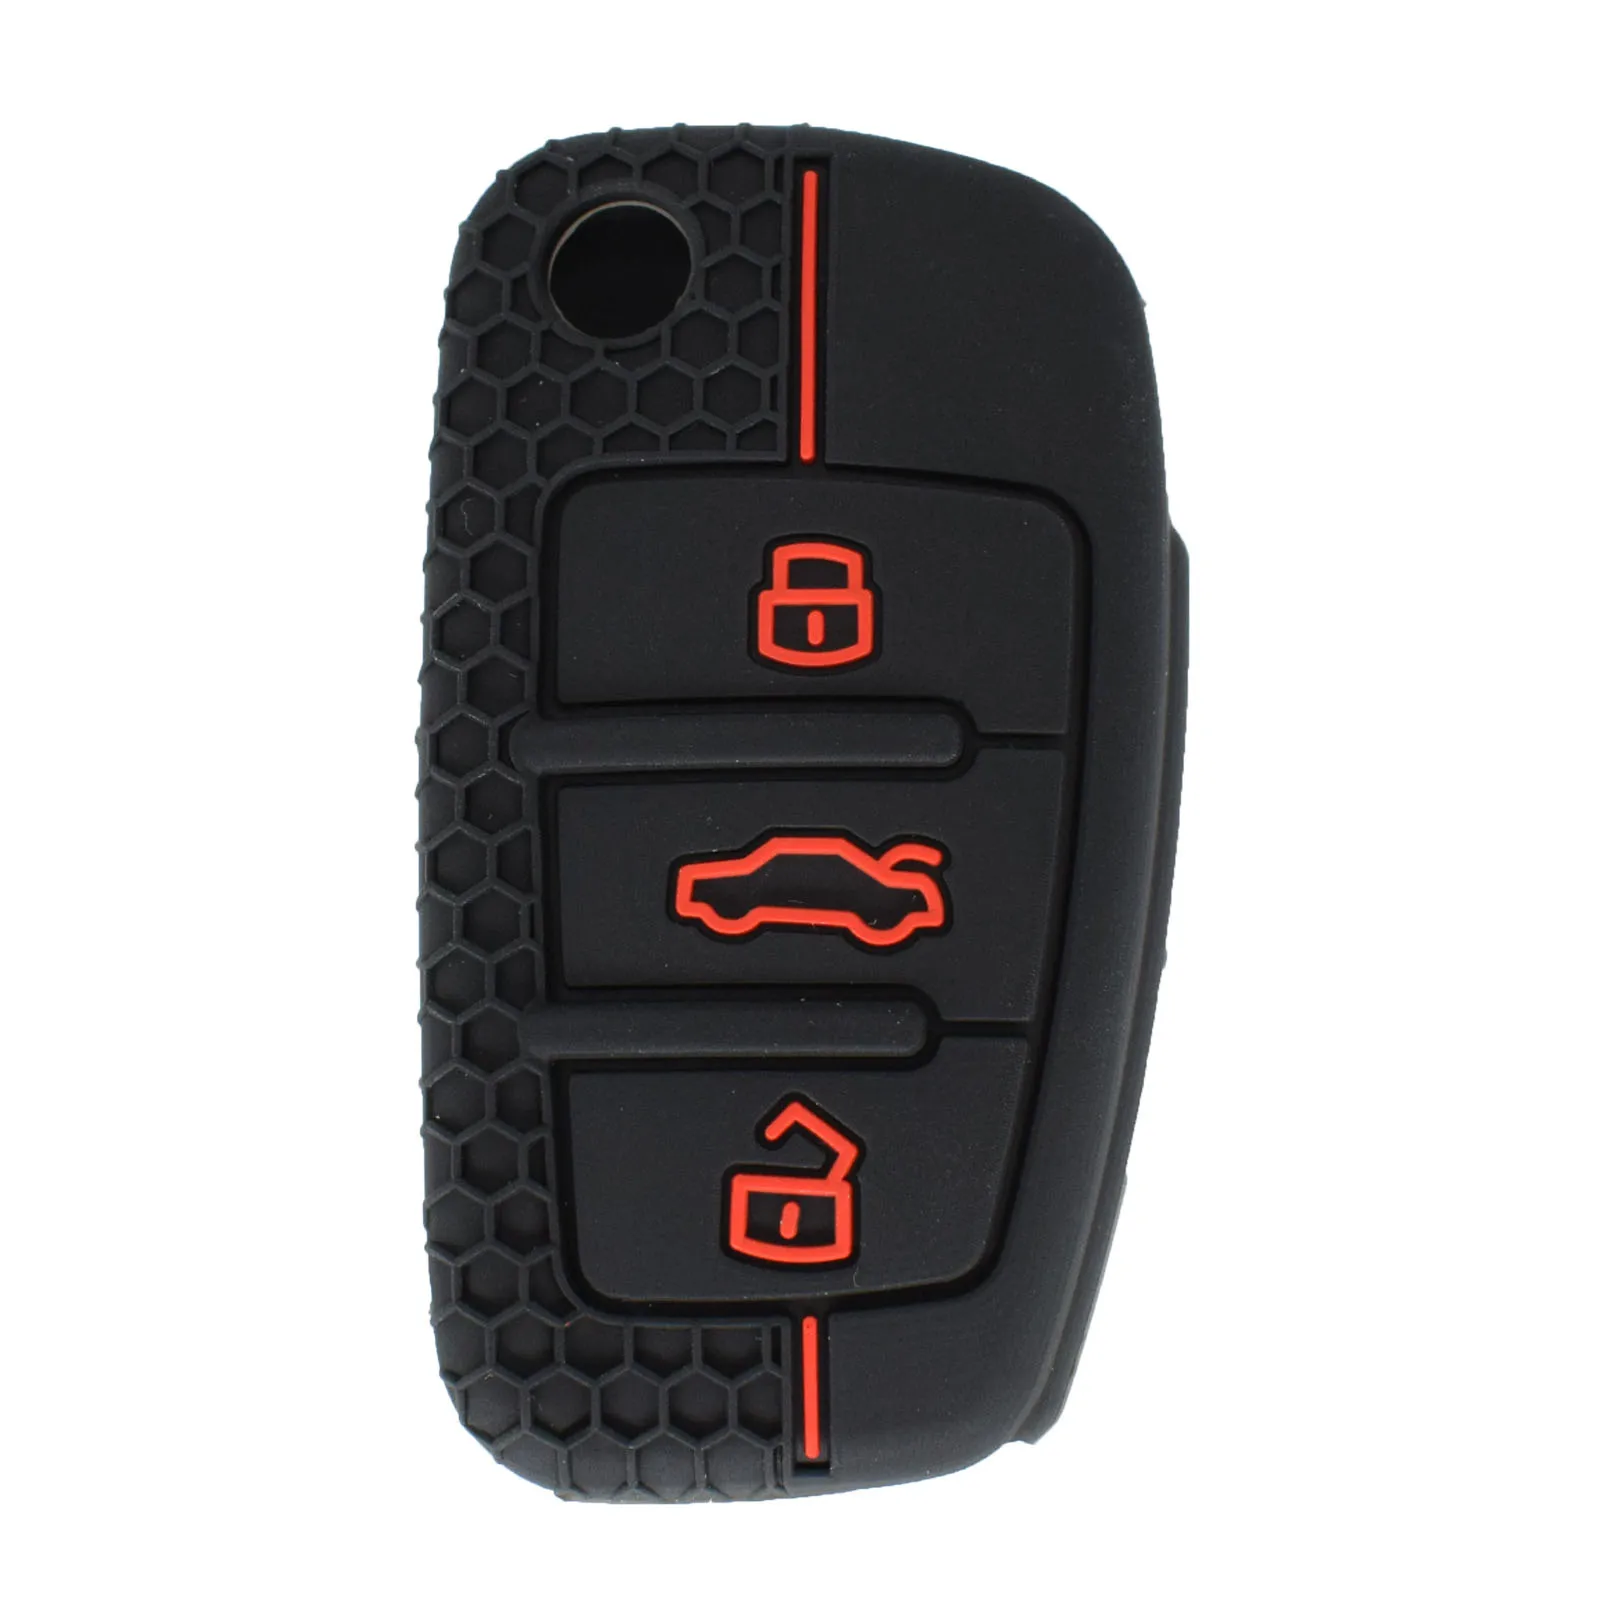 Silicone Remote Car Key Cover for Audi A1 S1 A3 S3 A4 A6 RS4 TT Q3 Q7 2005 - 2 - £10.19 GBP